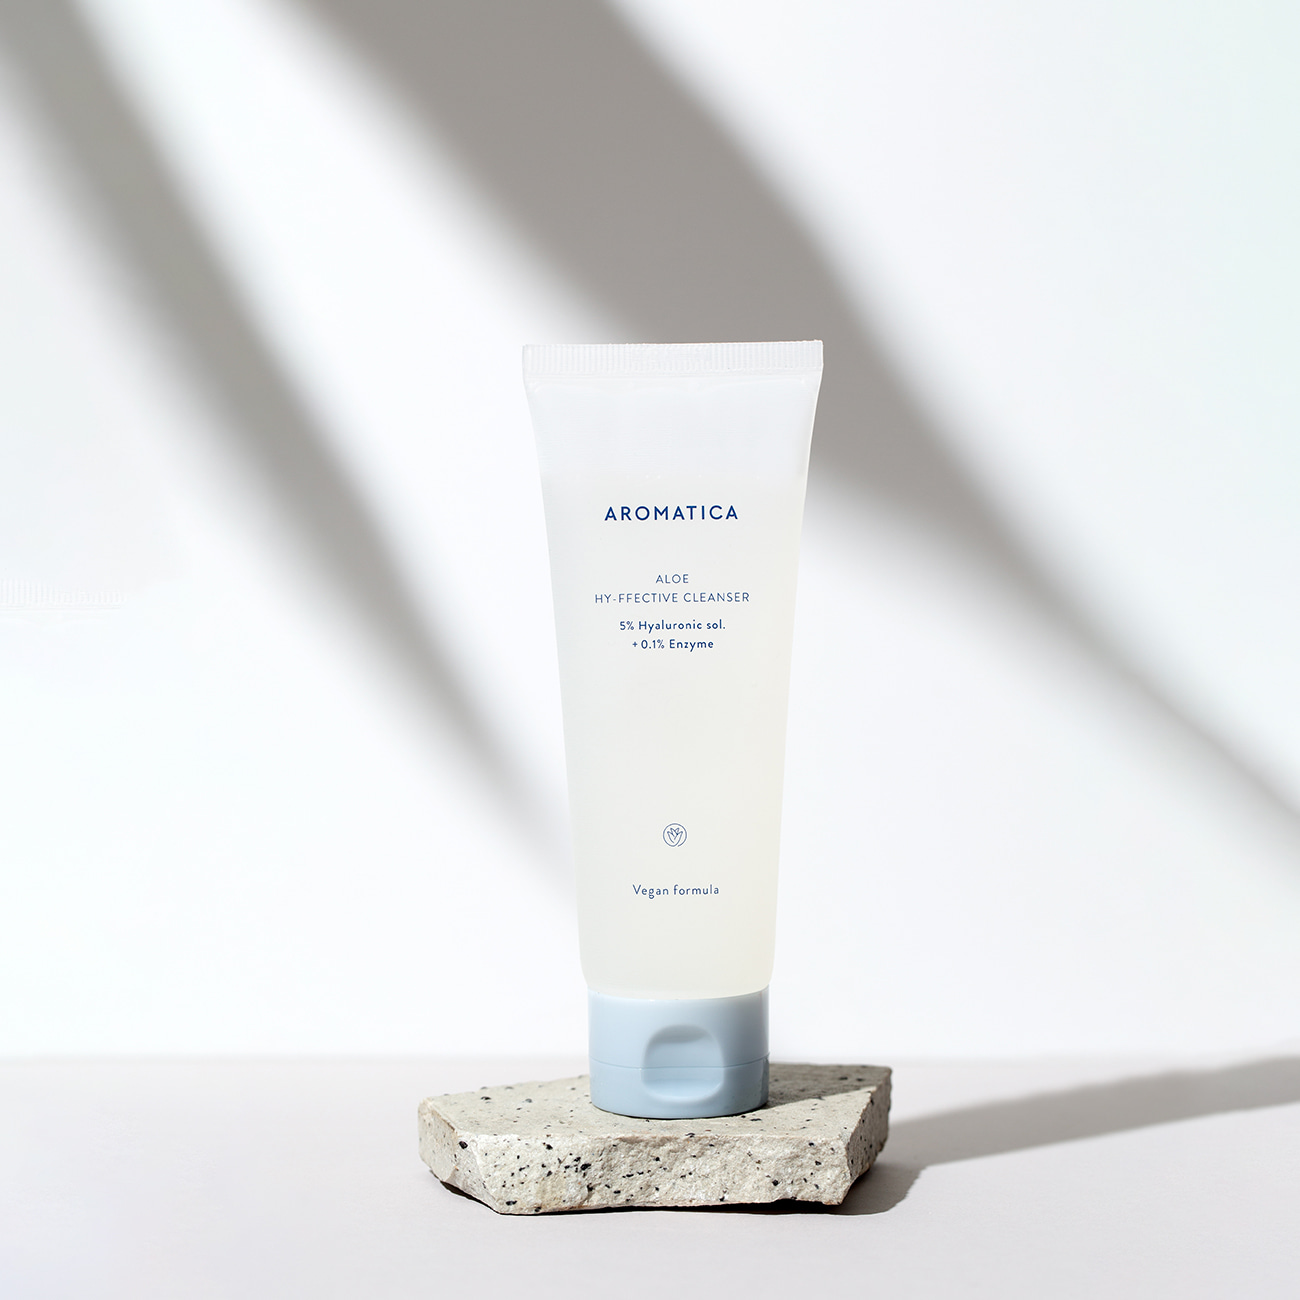 AROMATICA | Aloe Hy-ffective Cleanser5% Hyaluronic sol.+ 0.1% Enzyme